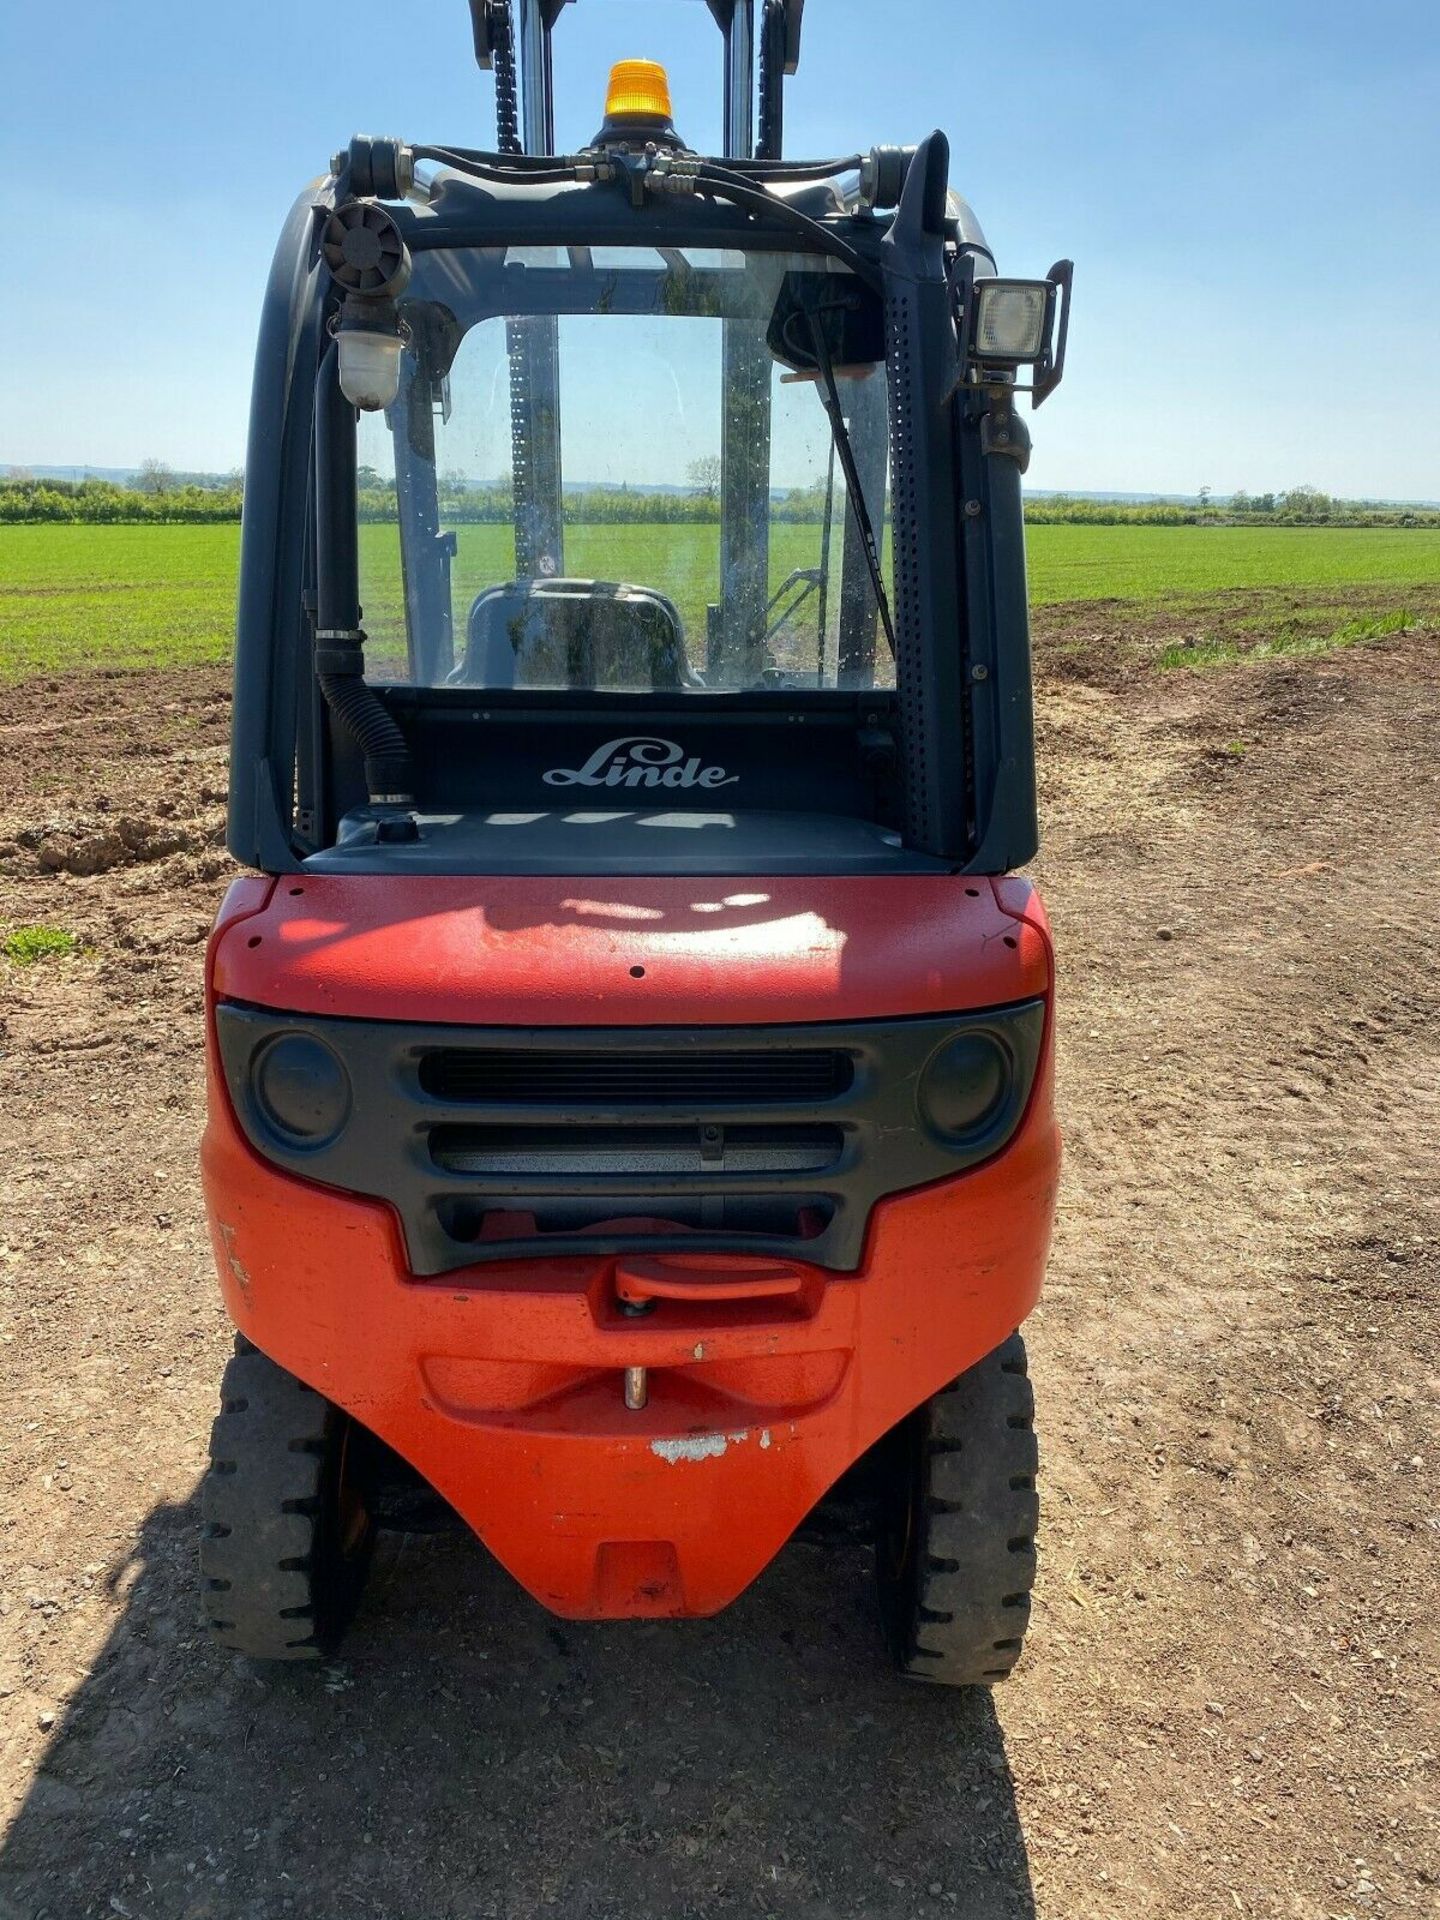 LINDE 2.5 TON, MODEL: H25D, 3.7 METRE LIFT, DUPLEX, SIDE SHIFT, ONLY 600 HOURS FROM NEW, 1 OWNER - Image 3 of 4